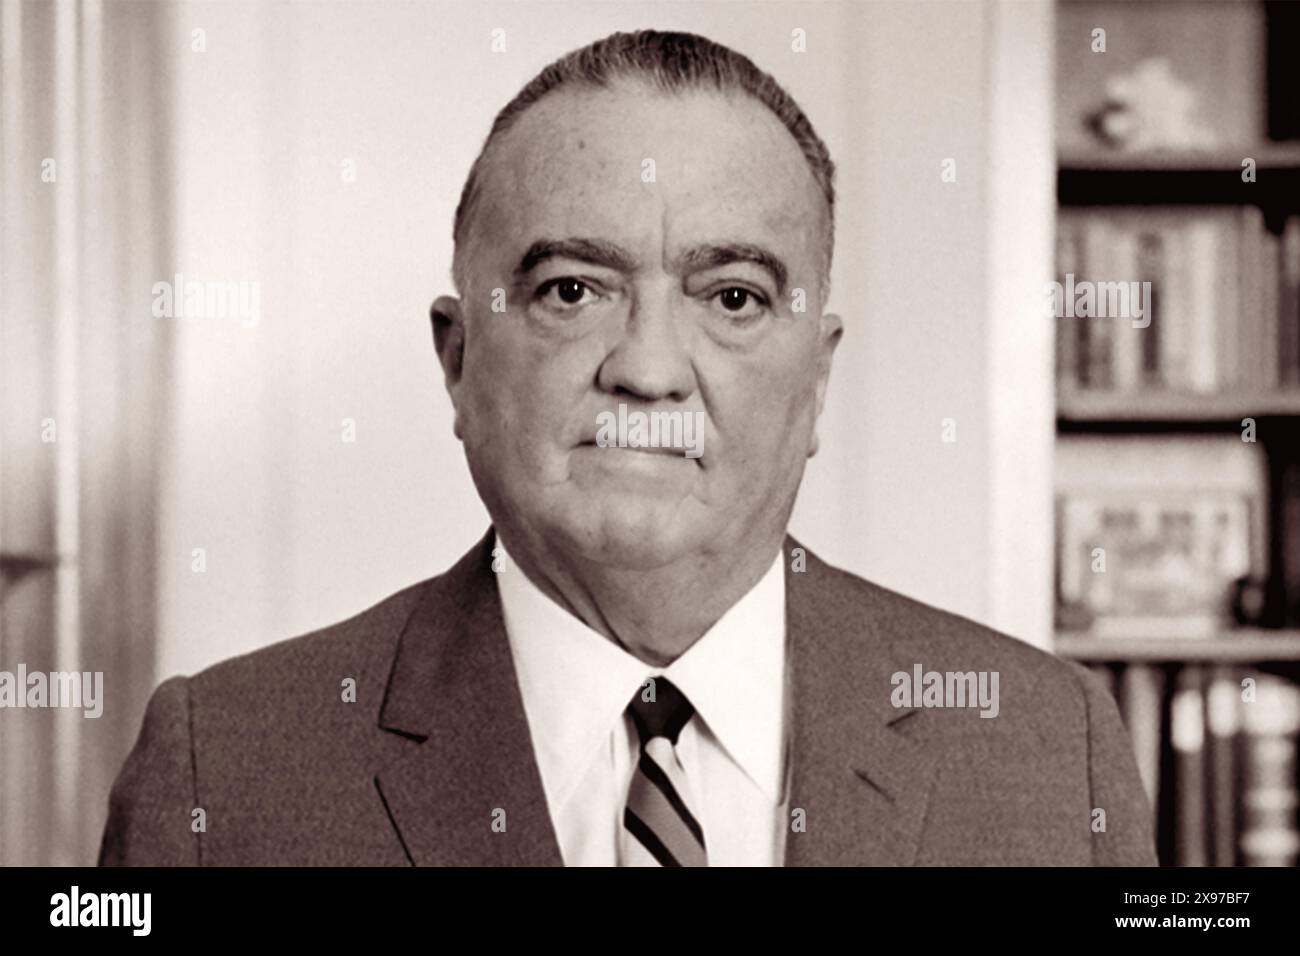 FBI Director J. Edgar Hoover (1895-1972) in September, 1961. Hoover was the final Director of the Bureau of Investigation (BOI) and the first Director of the Federal Bureau of Investigation (FBI). He served a total of 48 years leading both the BOI and the FBI under eight Presidents. Stock Photo